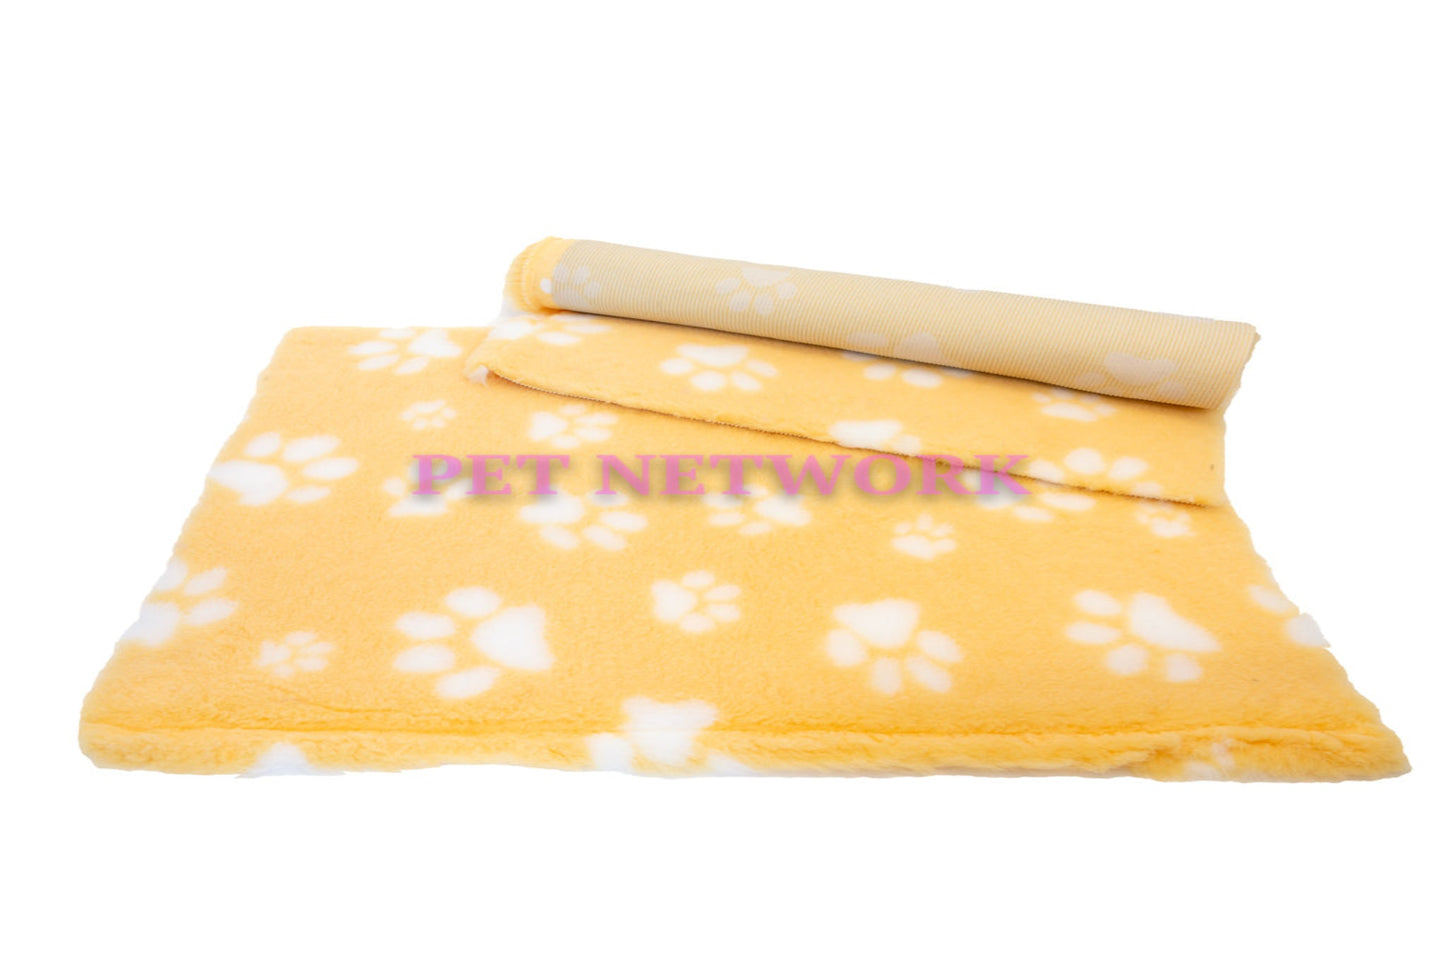 Vet Bed - Rubber Backed - Yellow with White Designer Paws